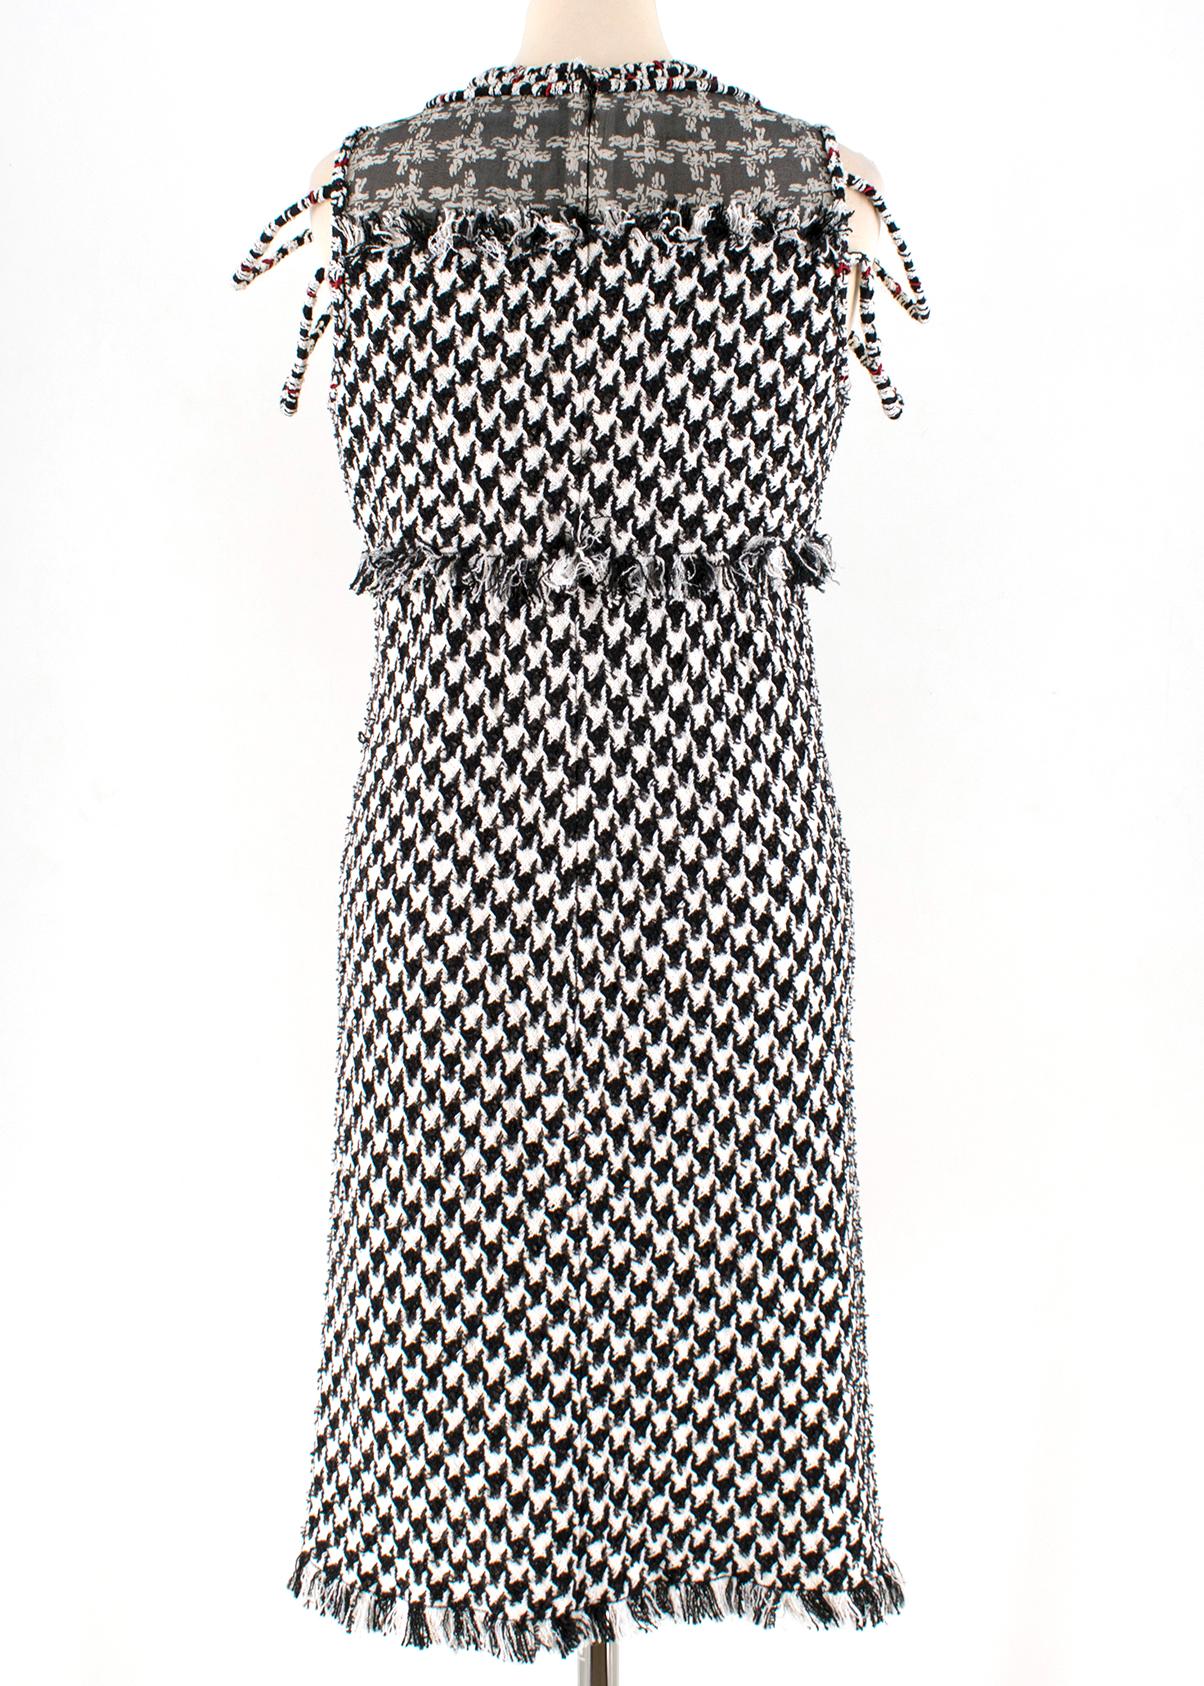 chanel houndstooth dress